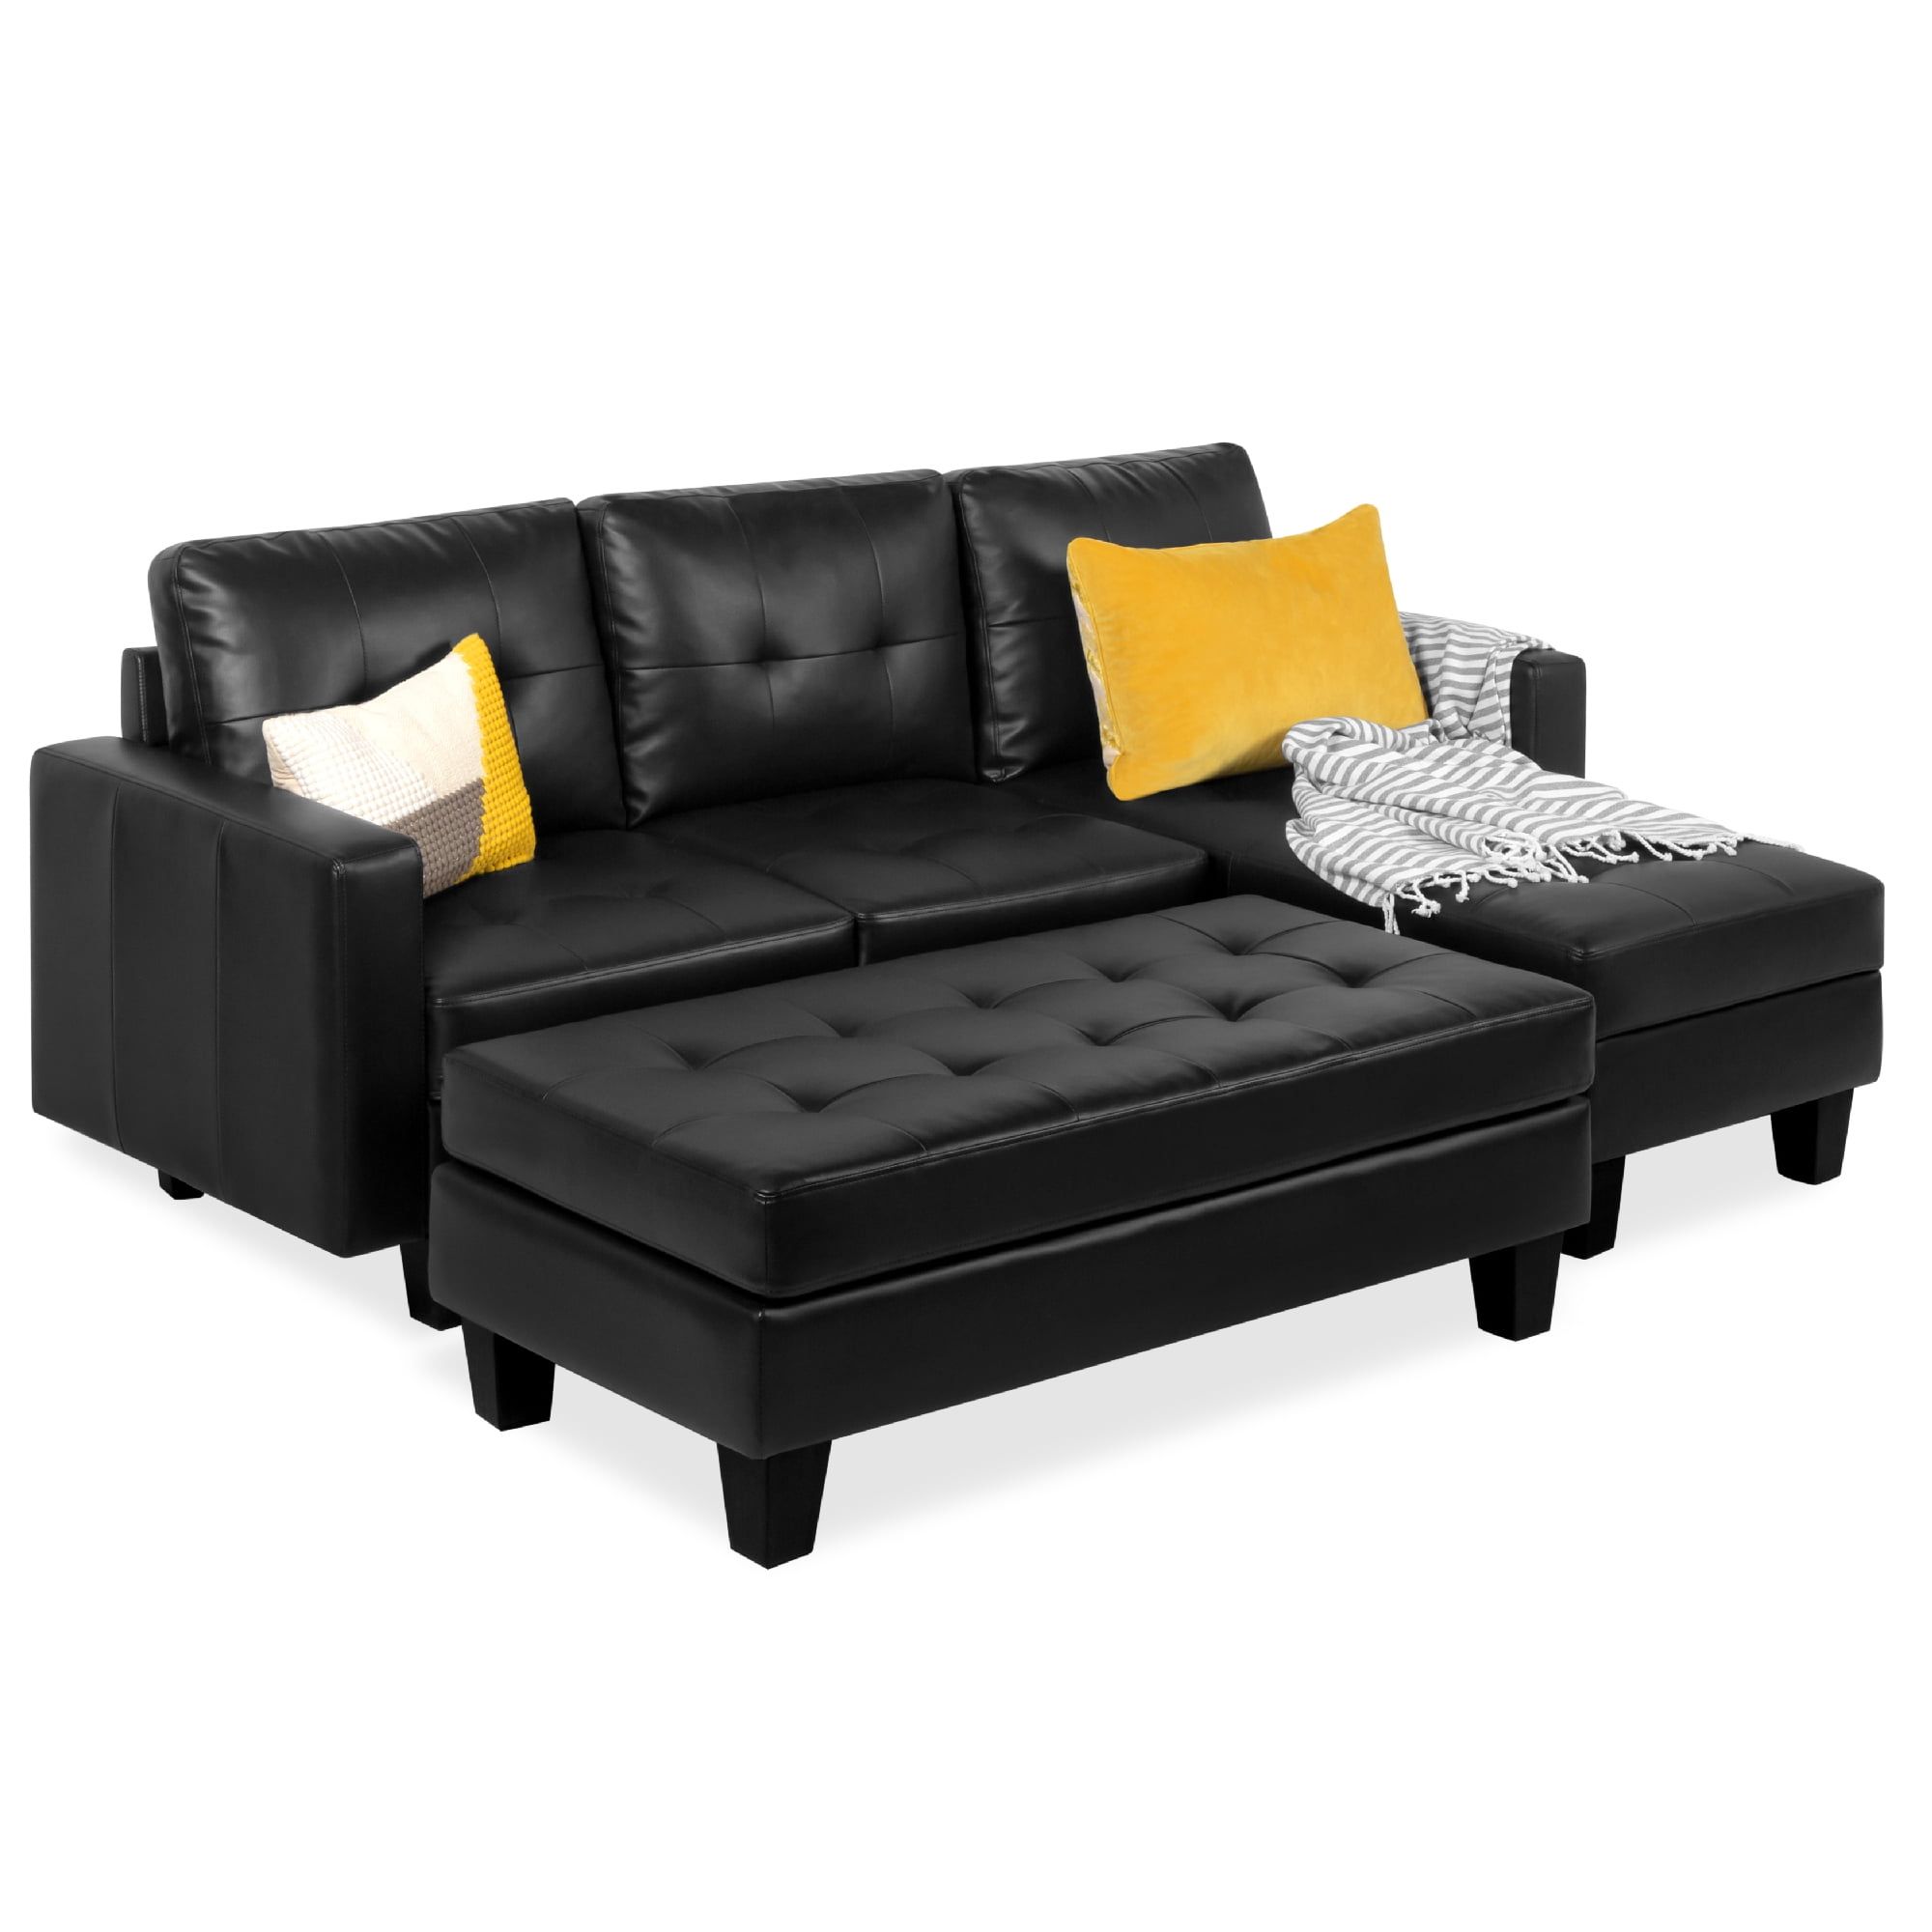 Best Choice Products 3 Seat L Shape Tufted Faux Leather Sectional Sofa Couch  Set W/ Chaise Lounge, Ottoman Bench – Black – Walmart Inside 3 Seat L Shaped Sofas In Black (View 2 of 15)